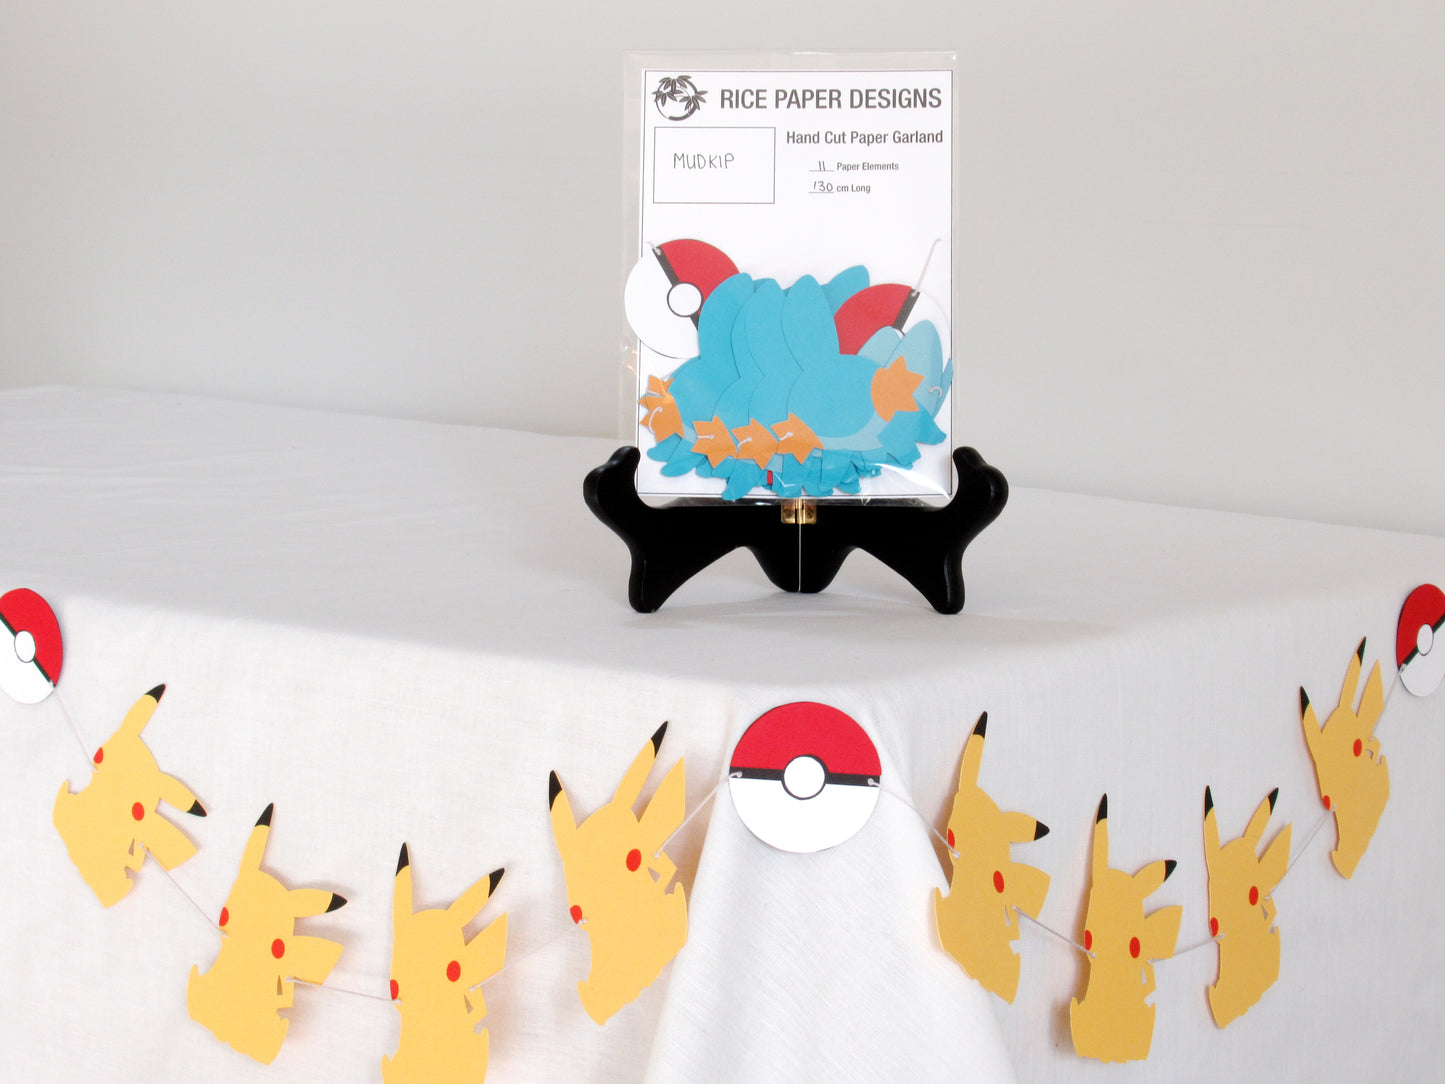 A garland with a series of paper mudkips and pokeballs arranged in neat bundle inside a clear bag. There is a paper behind them showing the Rice Paper Designs logo, and information about the garland. The bag is on a table, and below it is a sample garland with pikachu hung up.